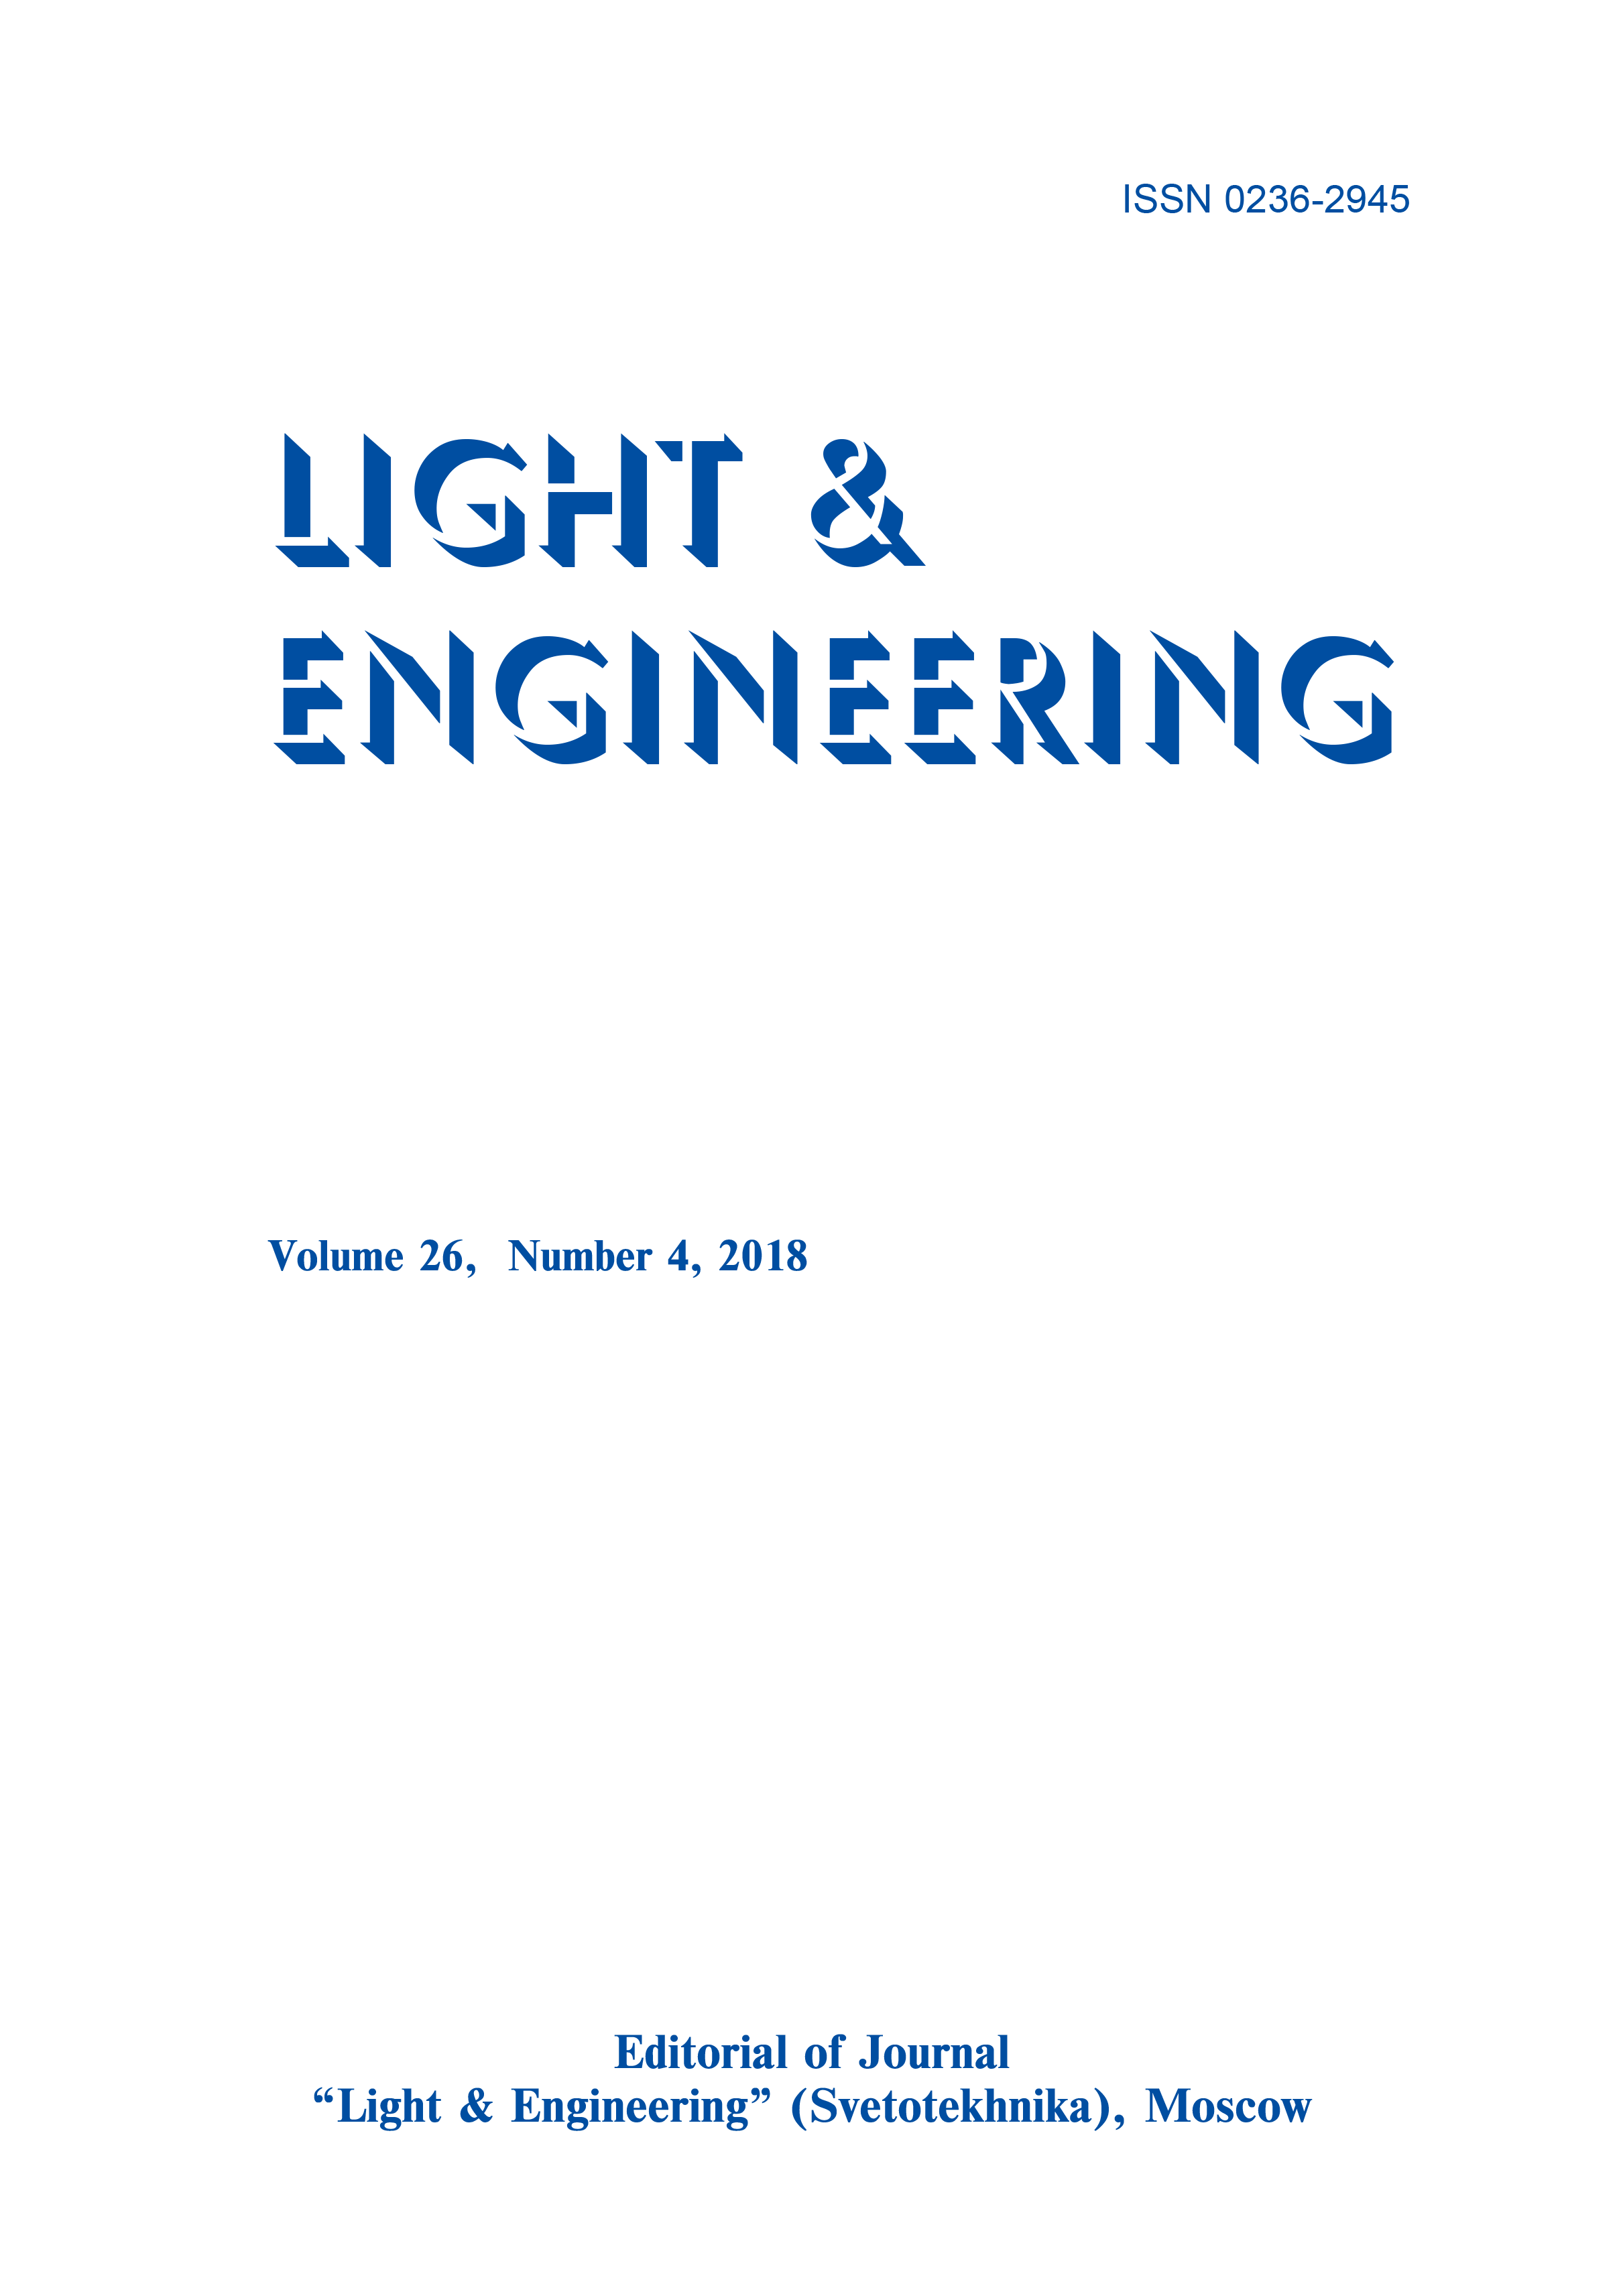 Pecularities of Protection and Legal Regime of Official Works in the Field of Lighting Design. L&E 26 (4) 2018